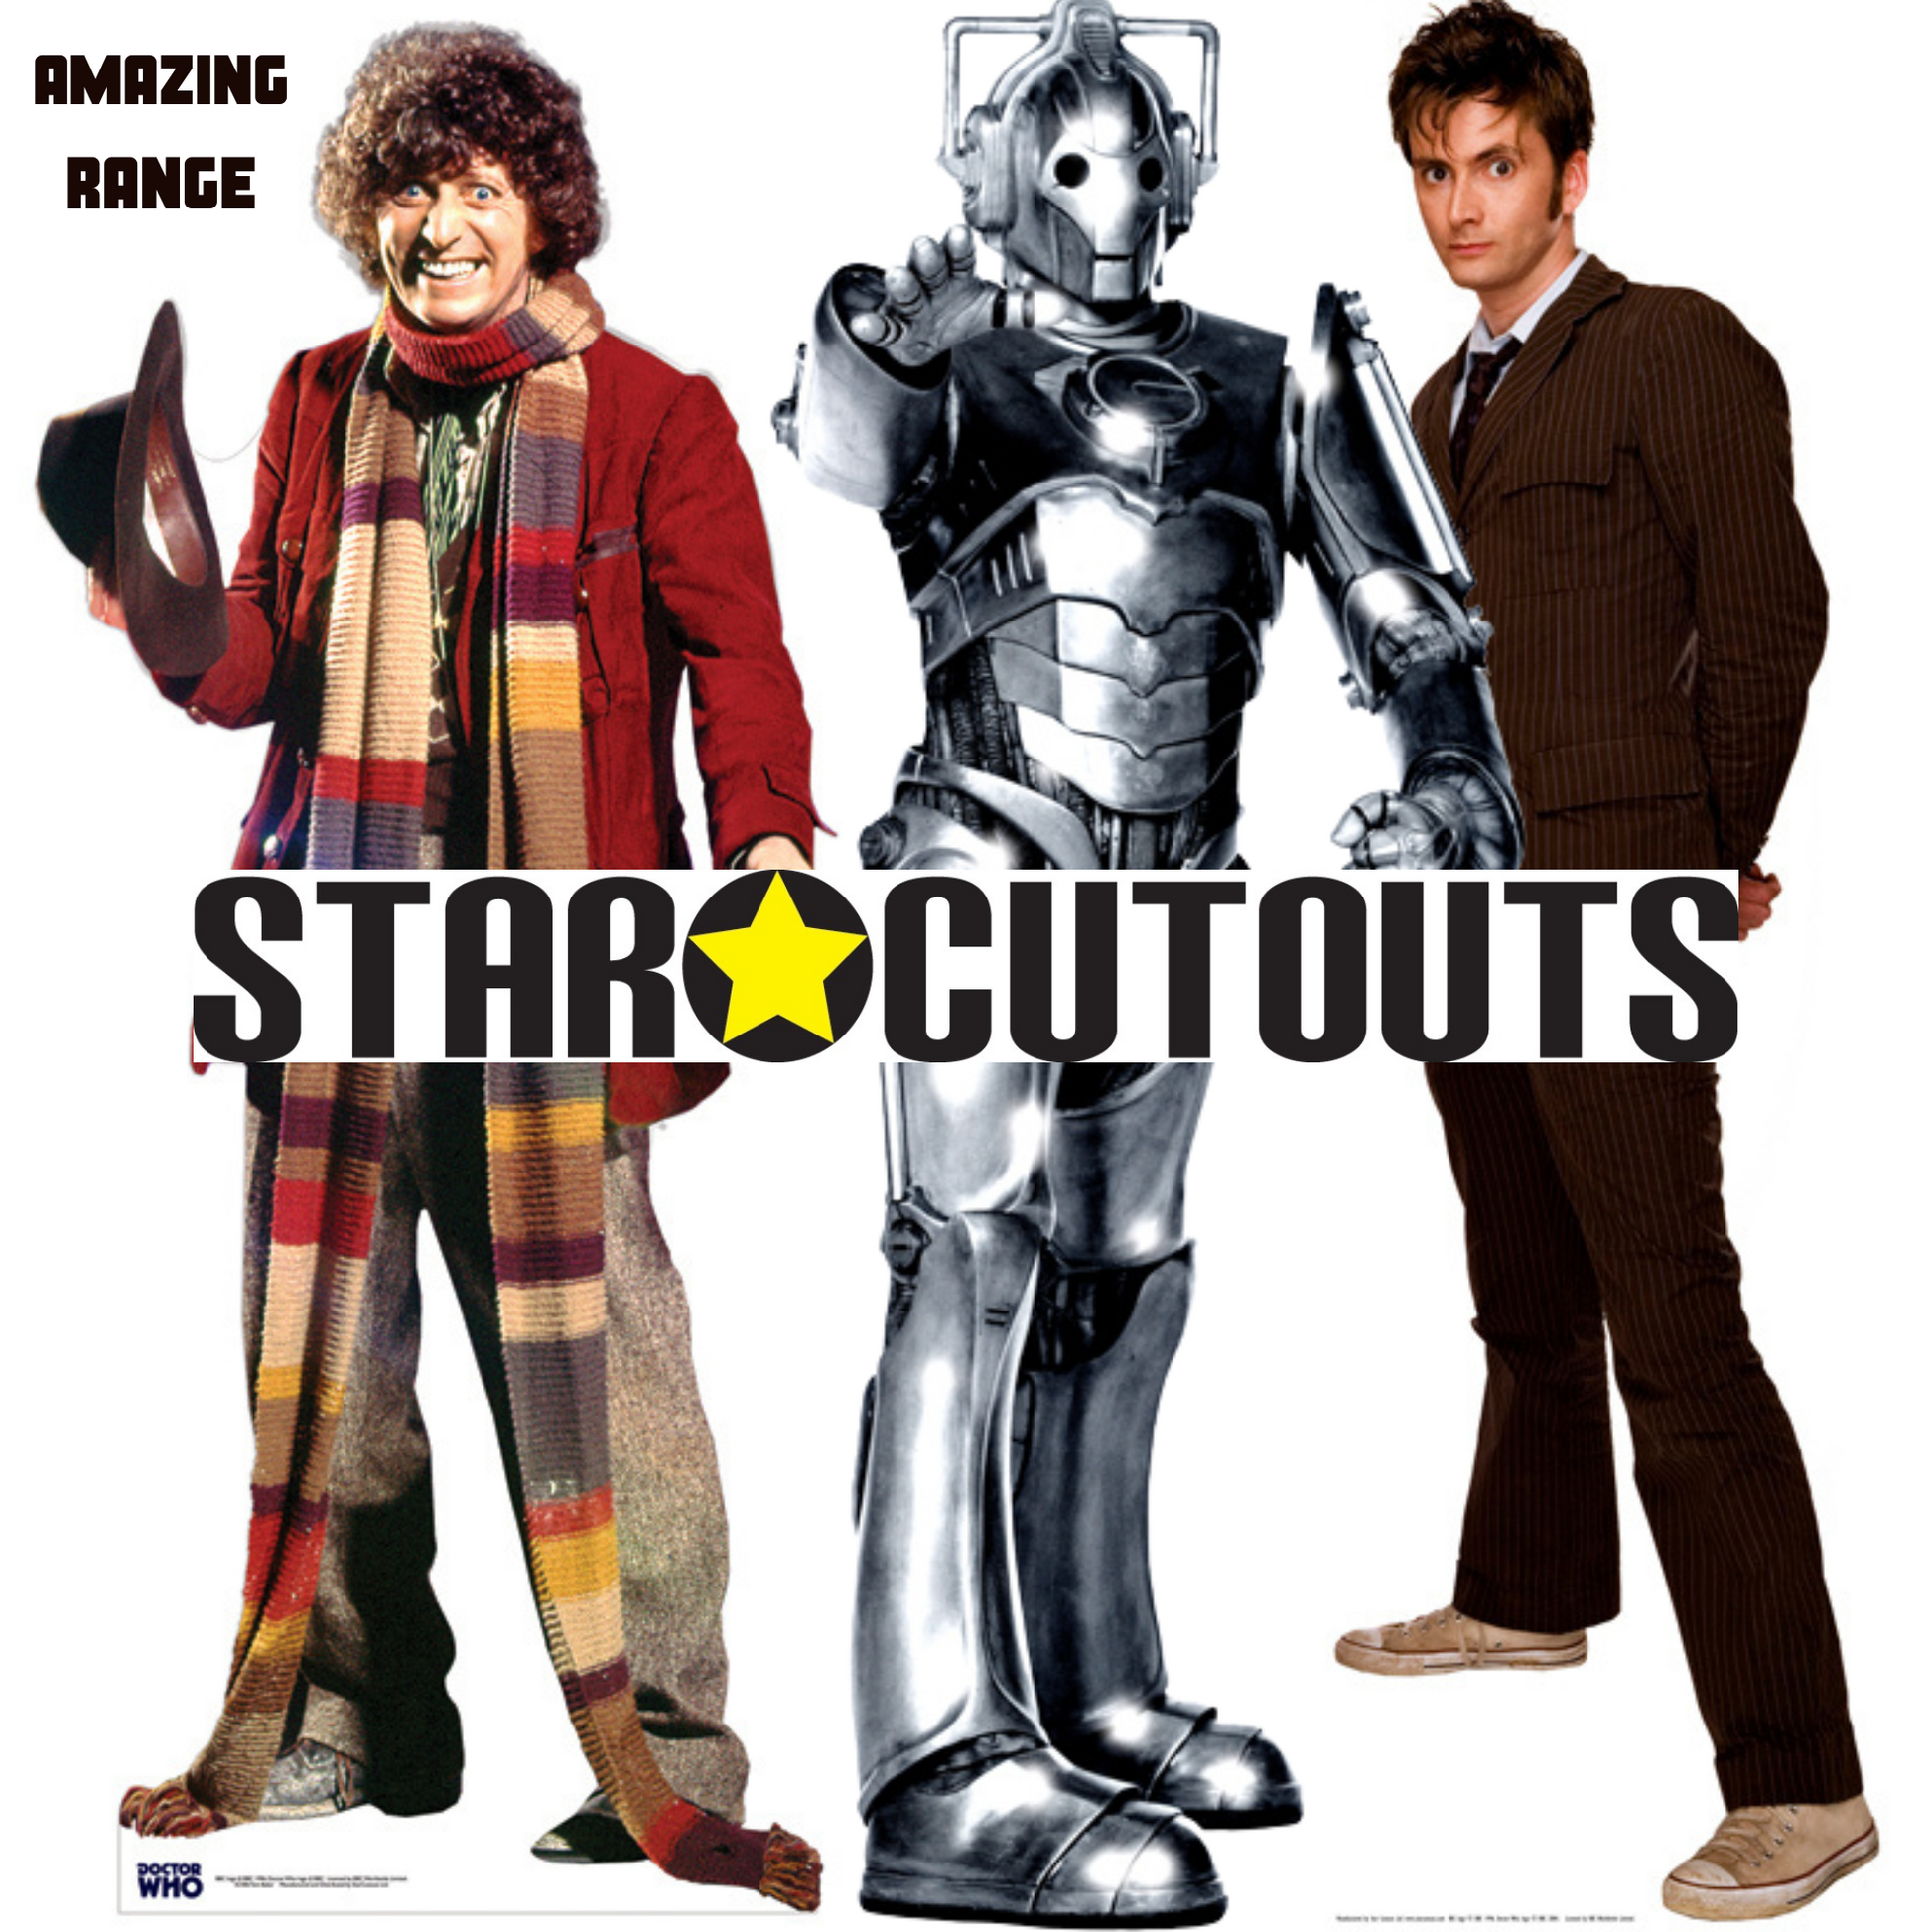 Bill Doctor Who Cardboard Cut Out Height 168cm